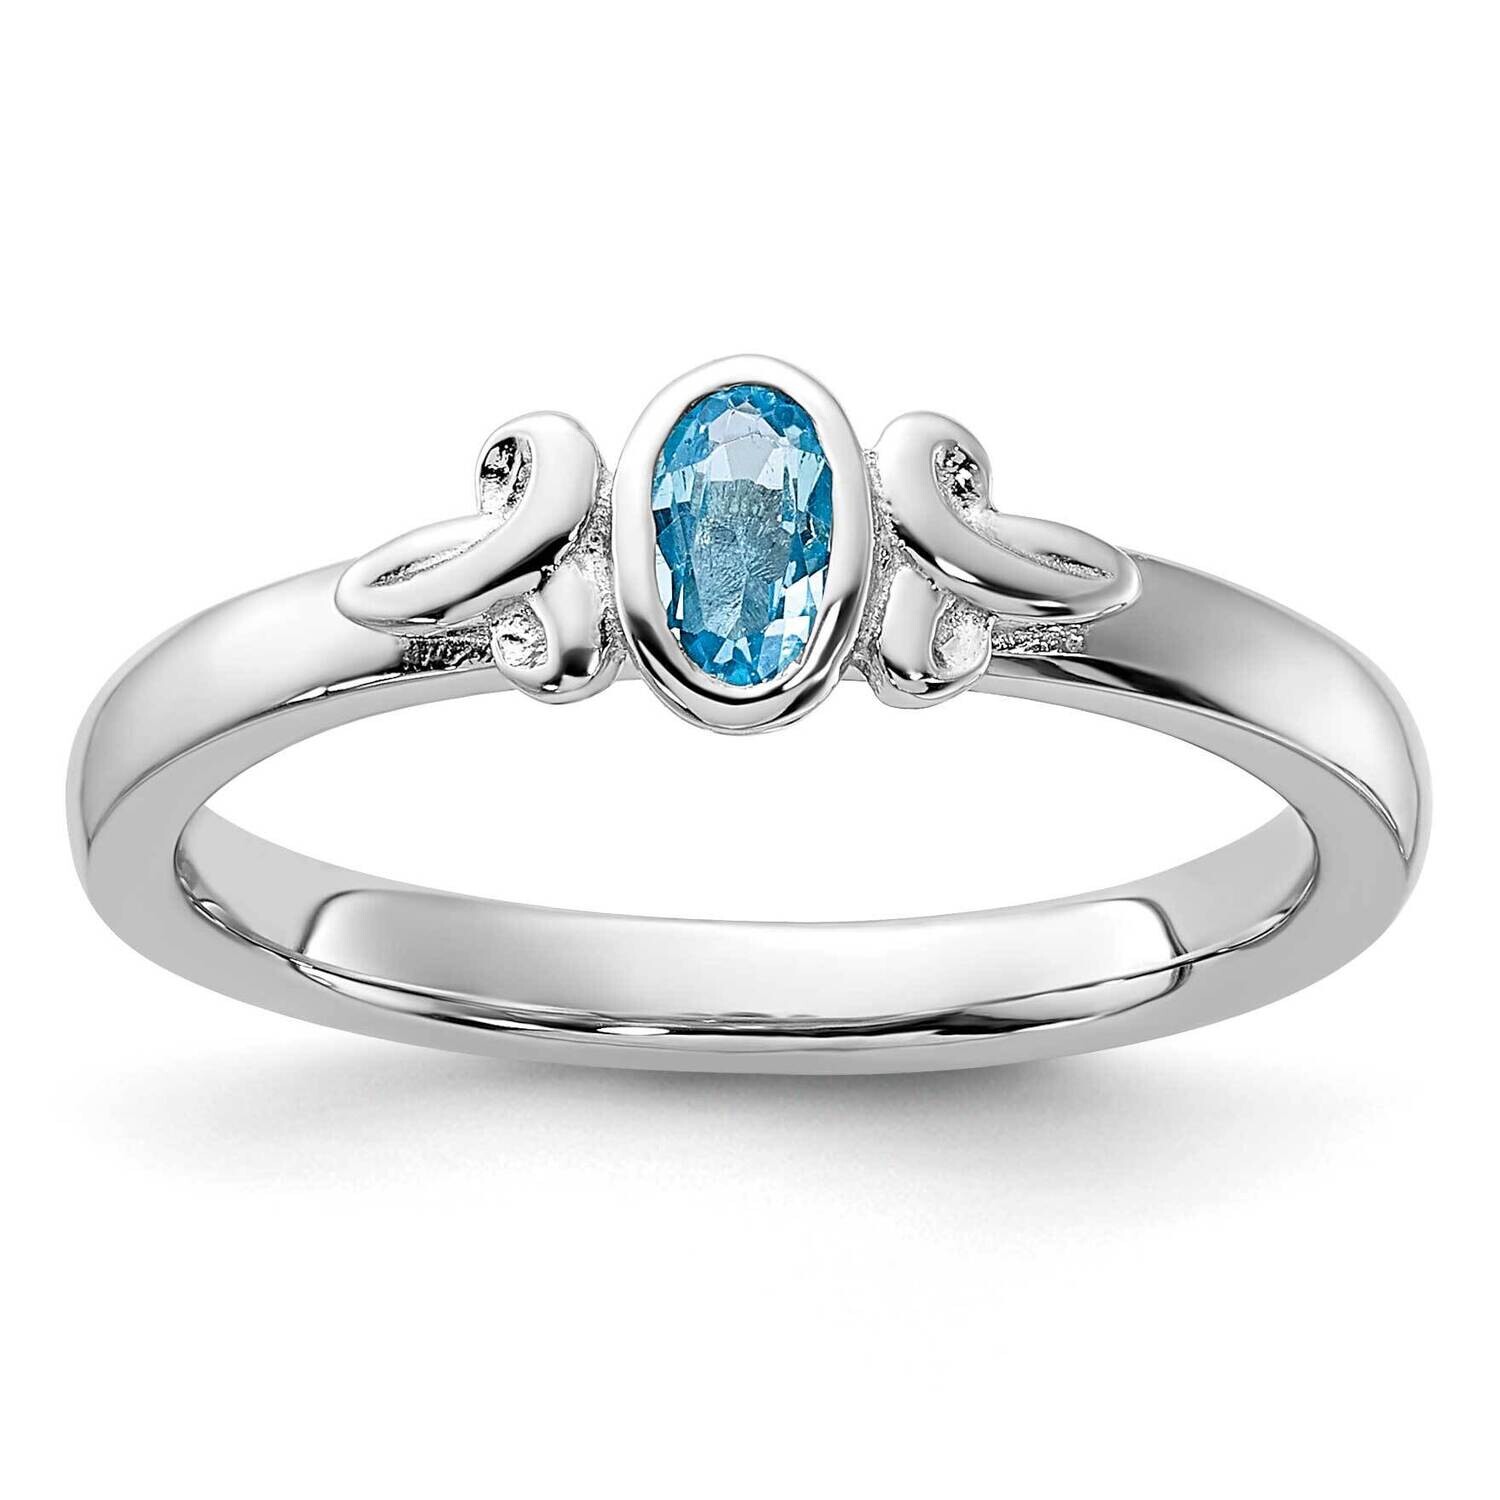 Stackable Expressions Blue Topaz Ring Sterling Silver QSK1296